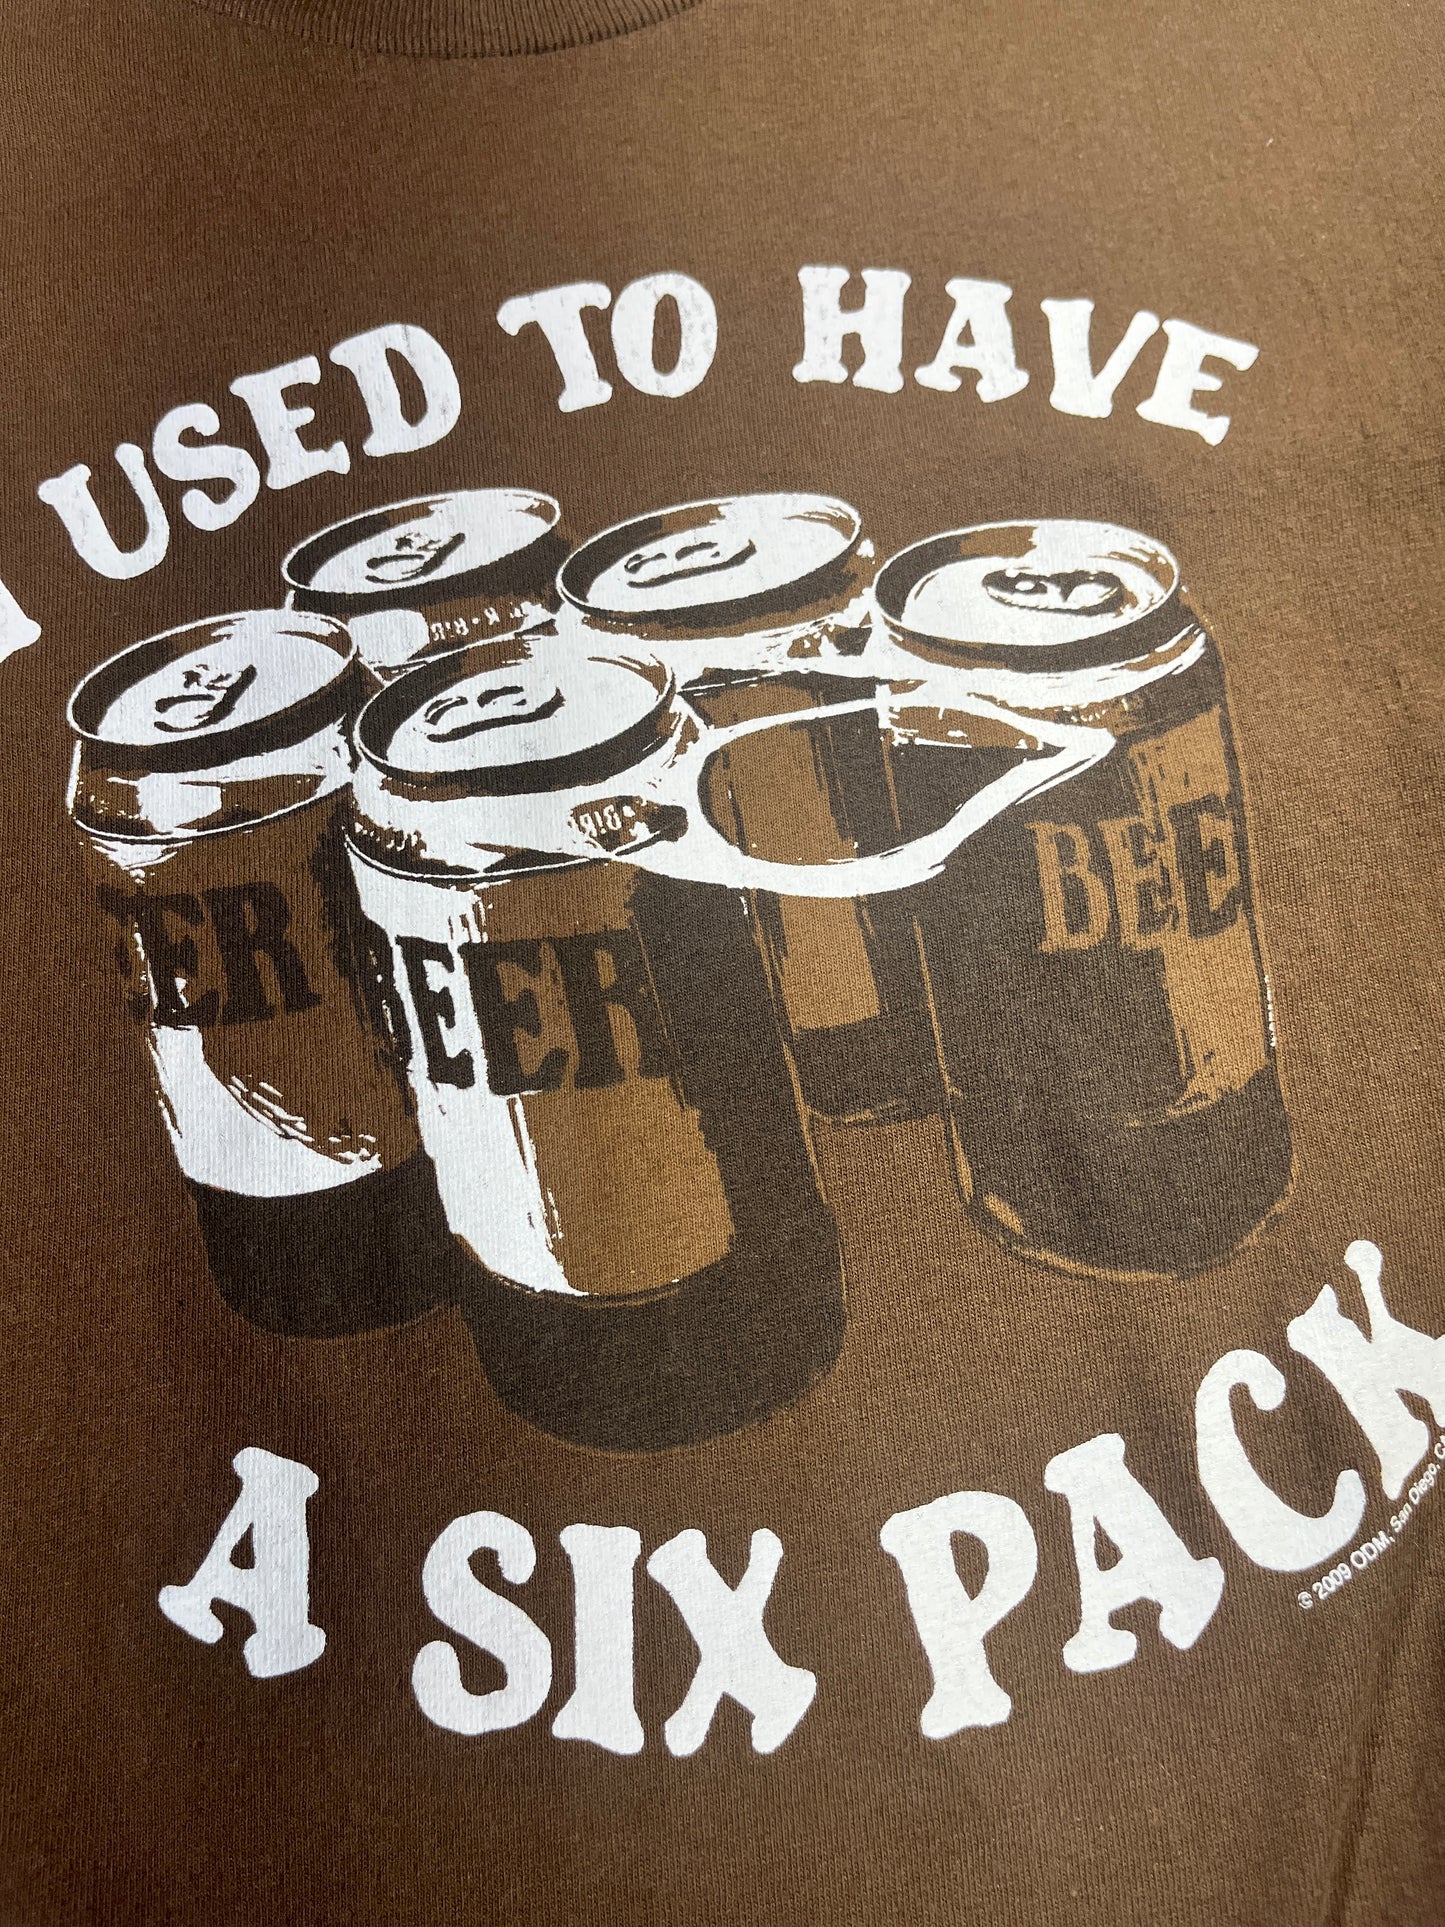 Vintage I Used To Have A Six Pack T-Shirt Check The Fridge Funny Slogan